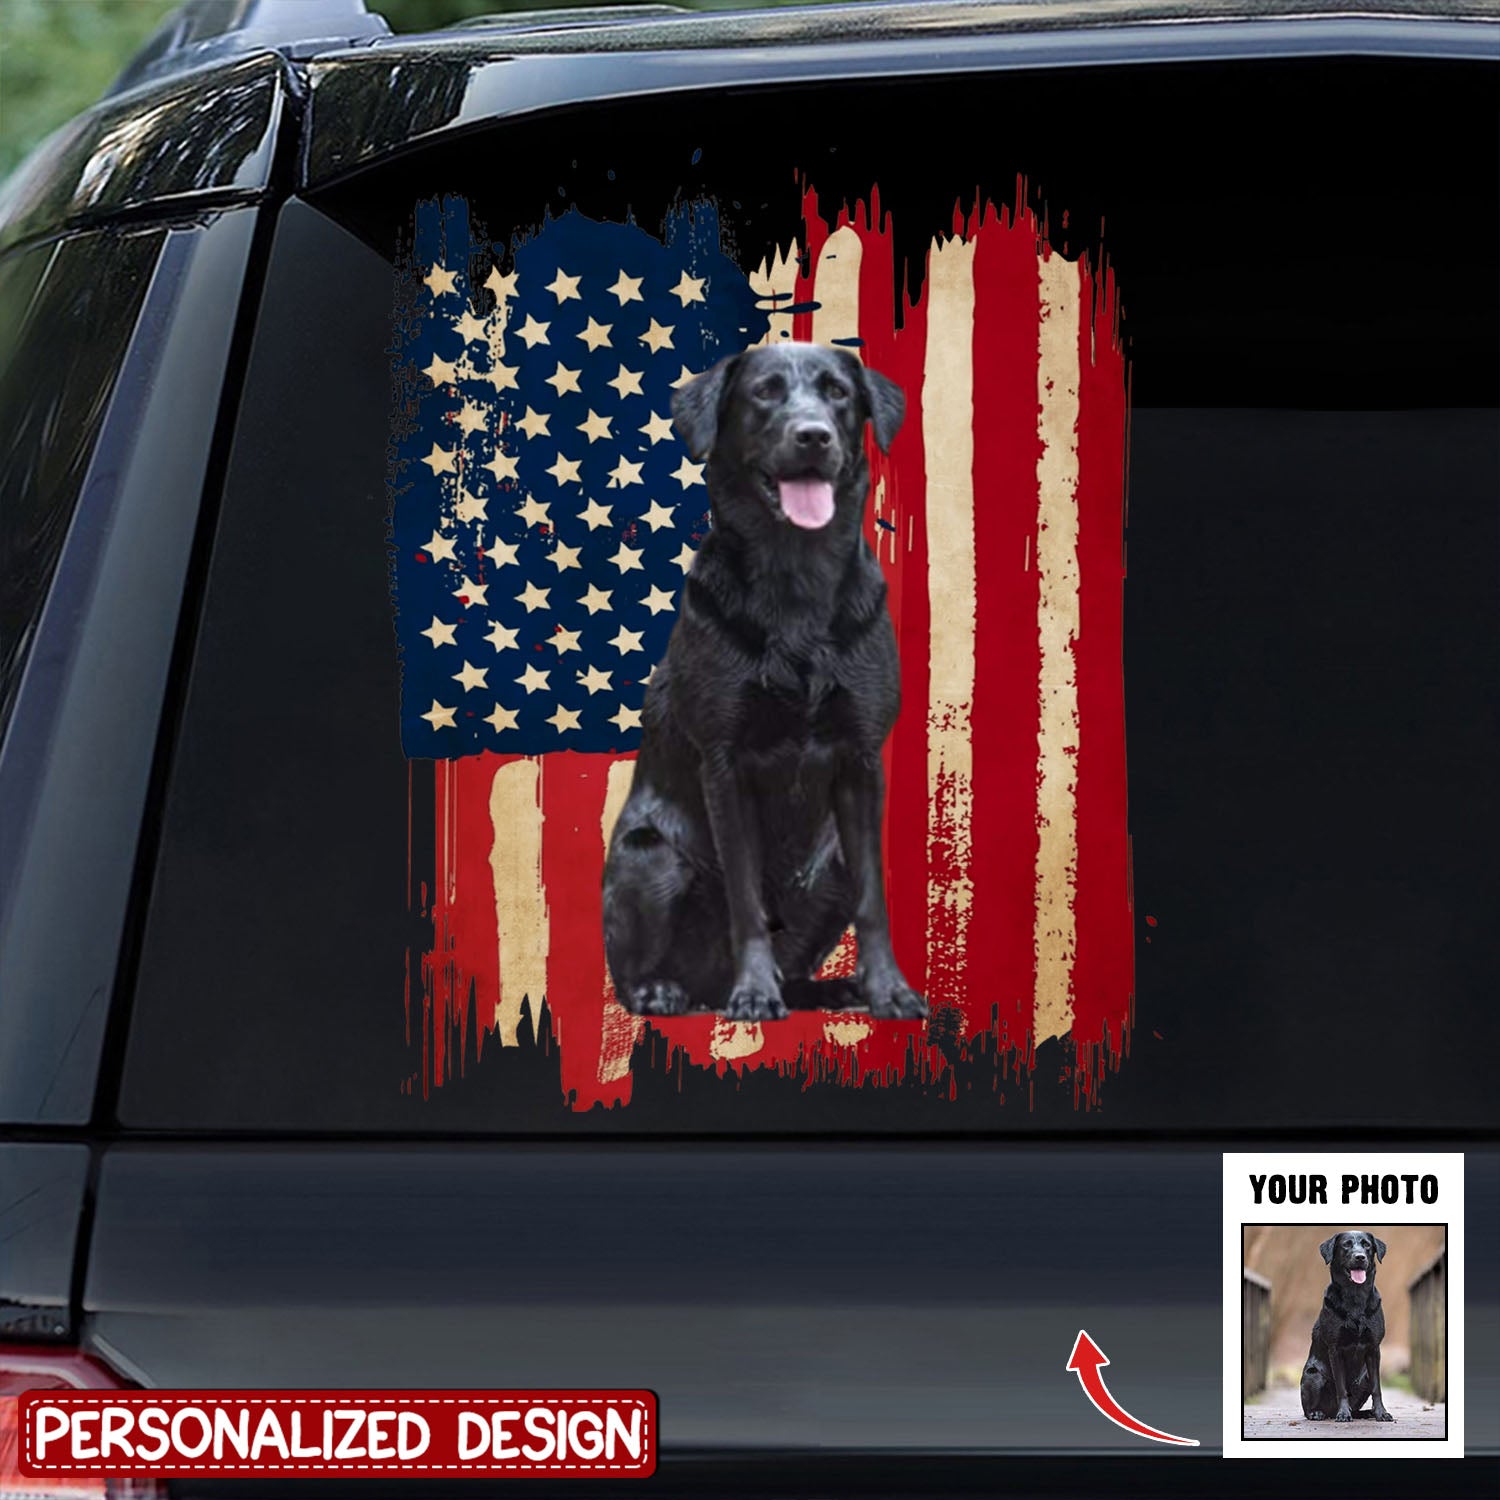 Personalized Dog Flag Printed Decal - Gift for Dog Lovers